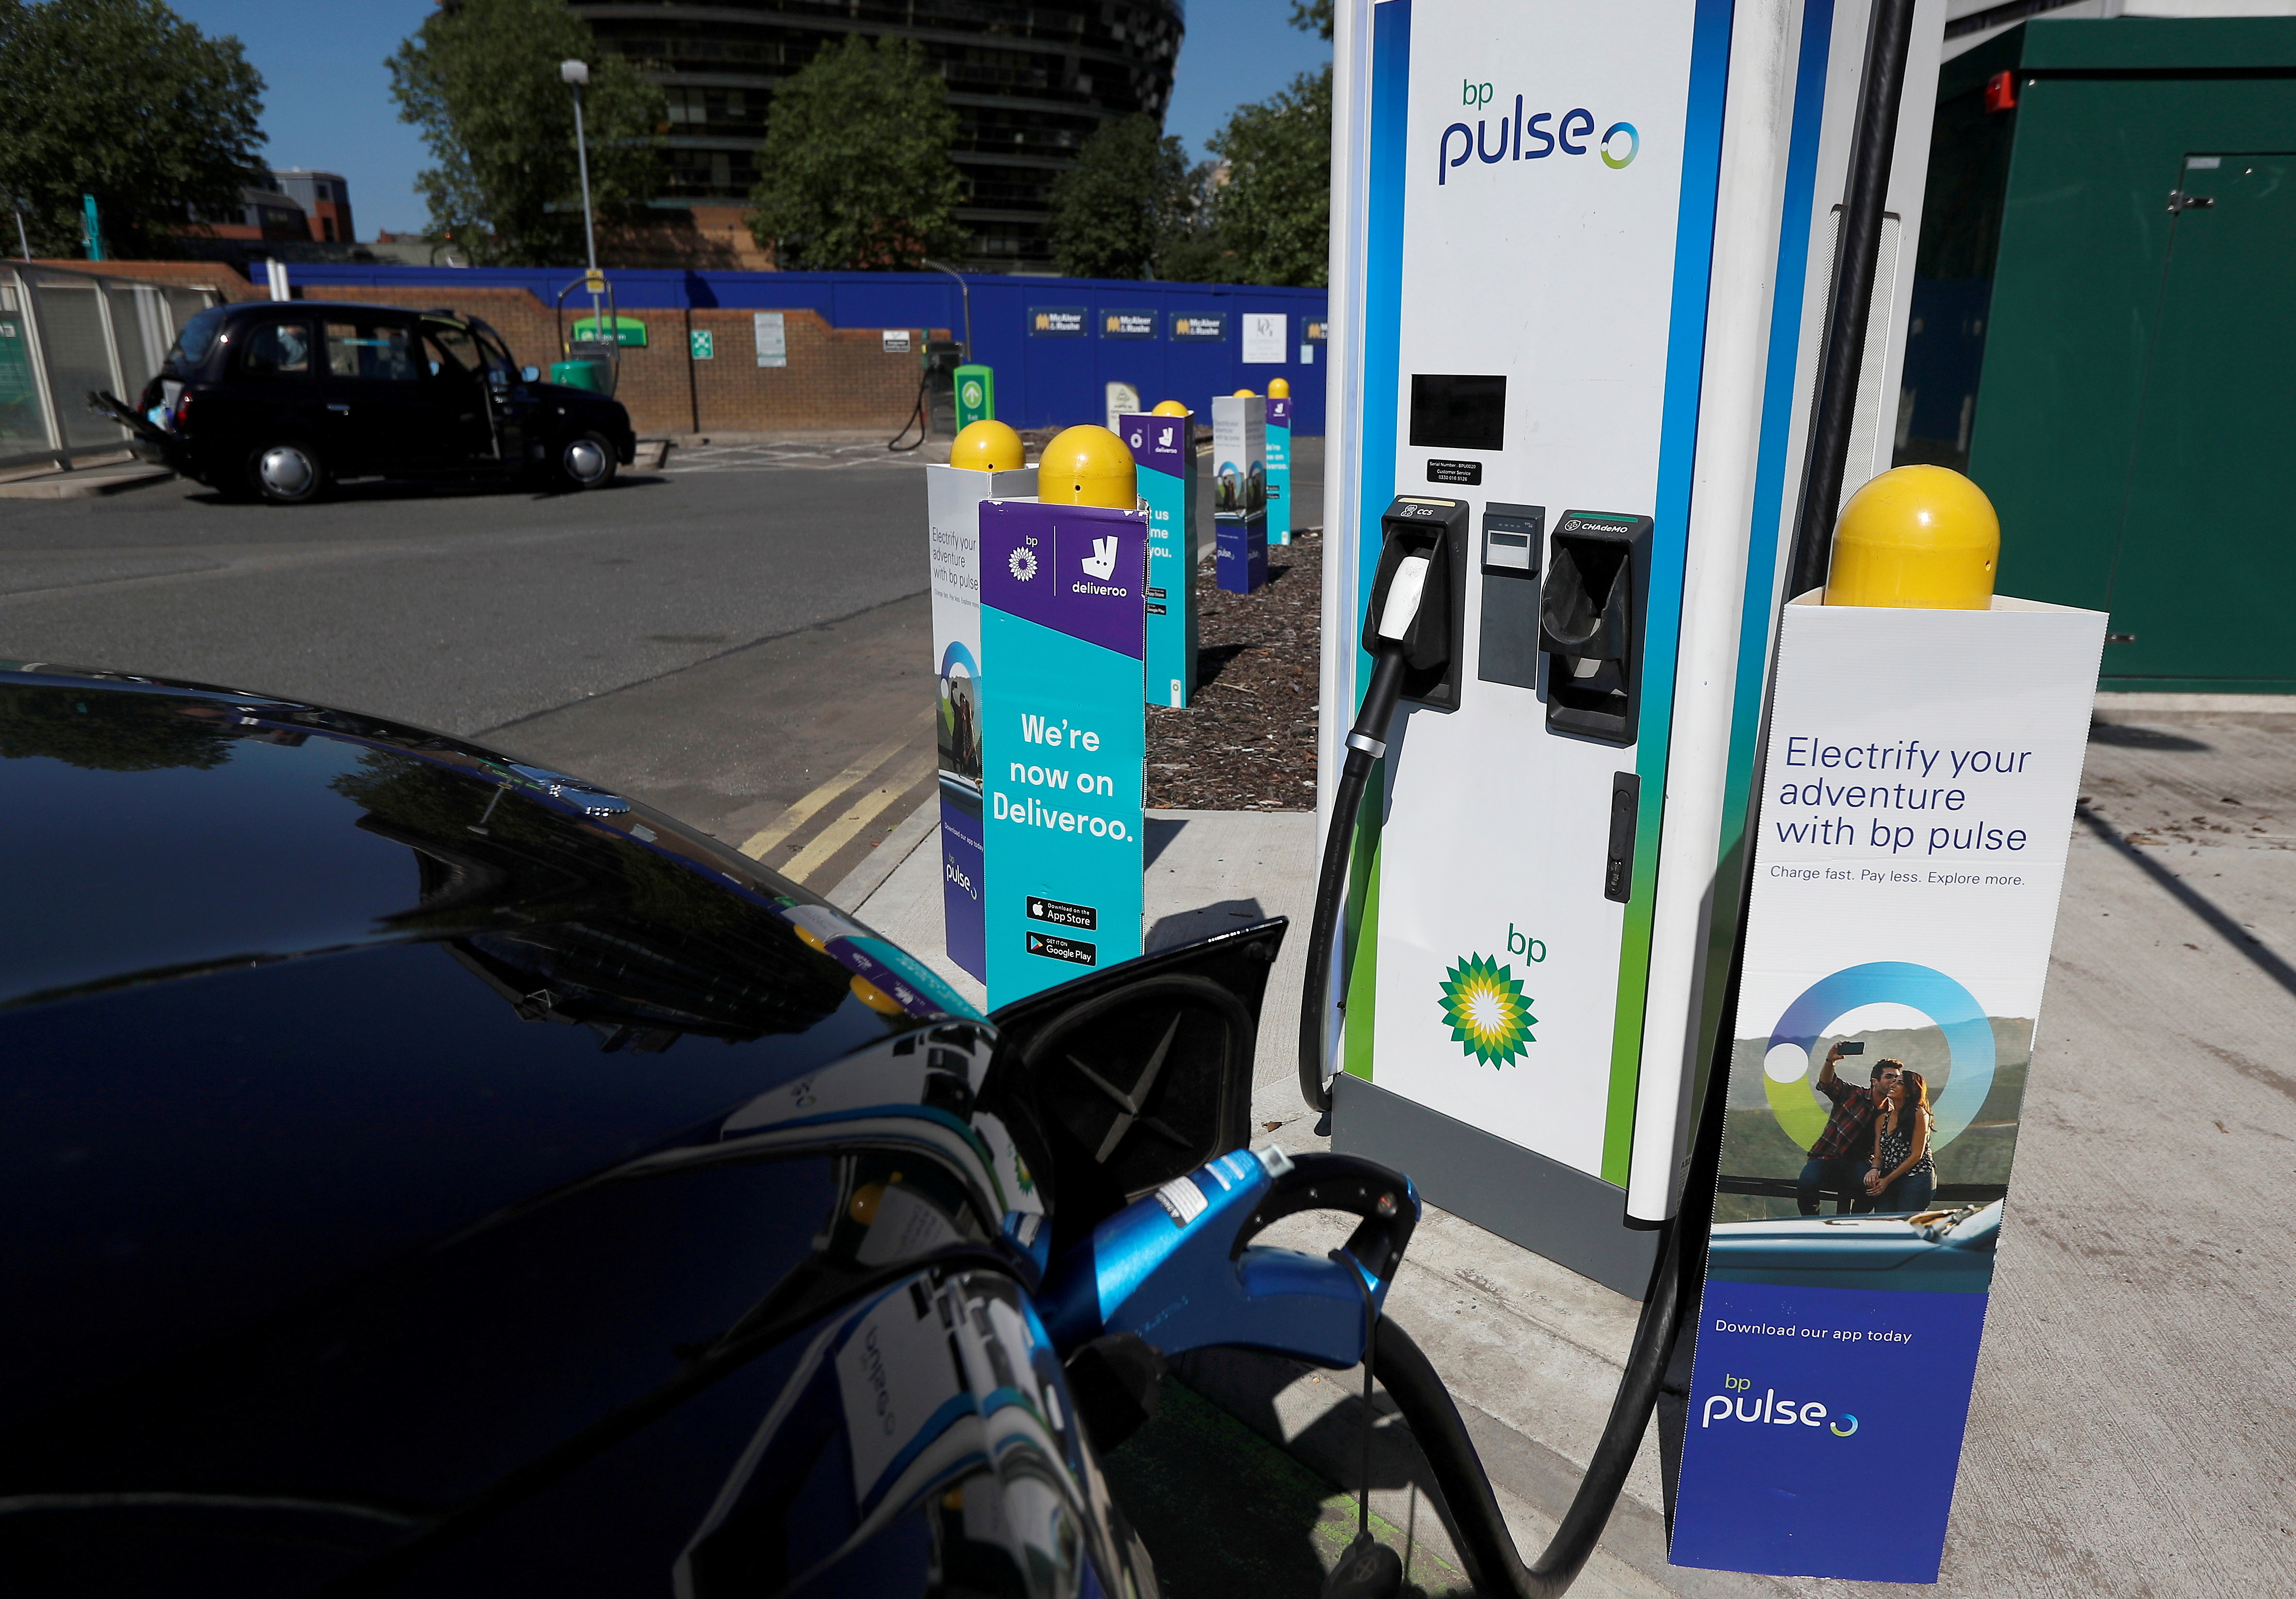 An electric powered taxi is seen being charged at a BP Pulse electric vehicle charging point in London